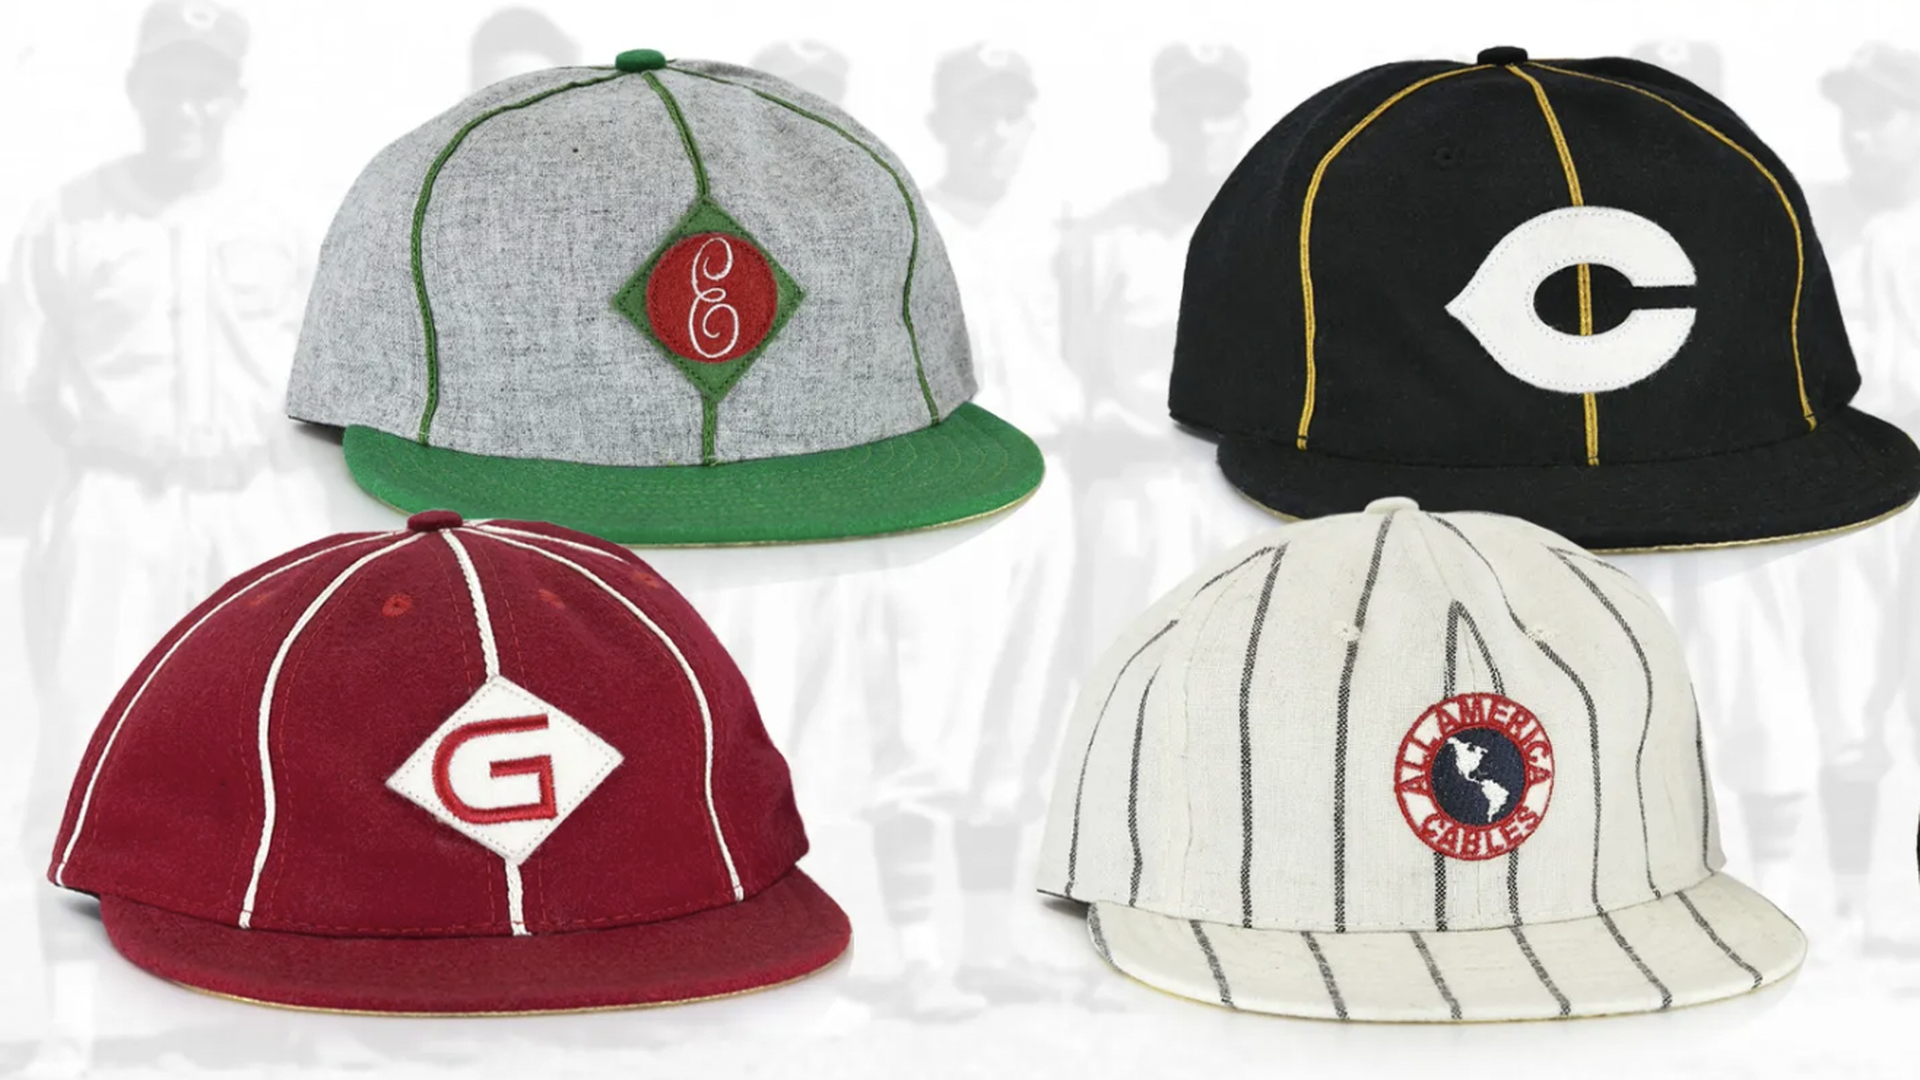 Four baseball caps with different logos.